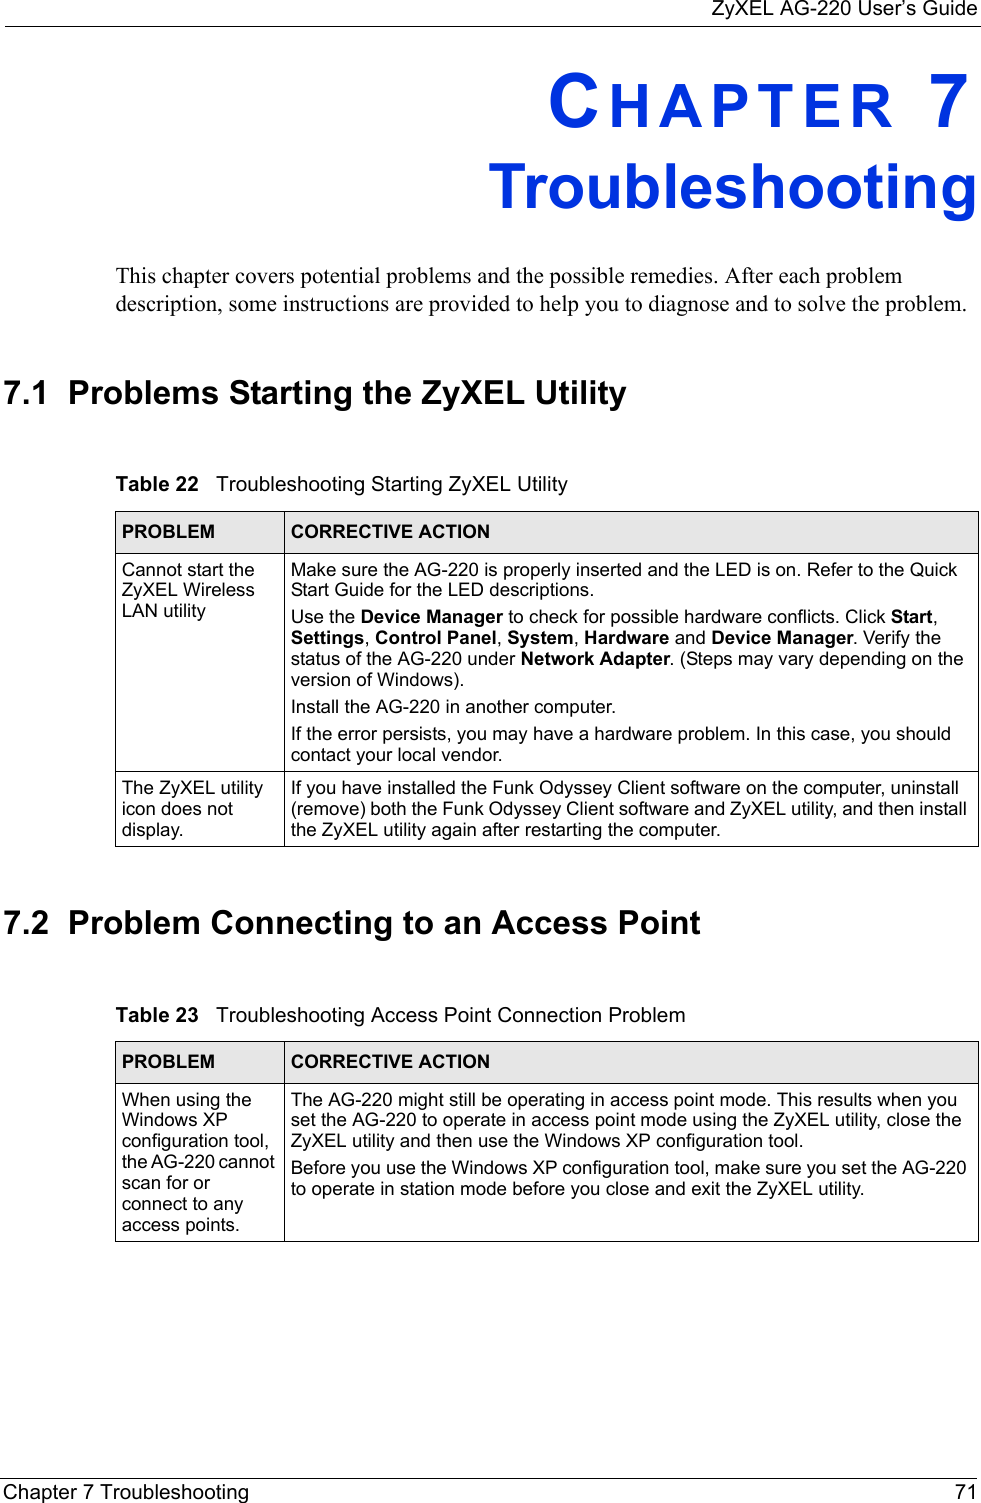 ZyXEL AG-220 User’s GuideChapter 7 Troubleshooting 71CHAPTER 7   TroubleshootingThis chapter covers potential problems and the possible remedies. After each problem description, some instructions are provided to help you to diagnose and to solve the problem.7.1  Problems Starting the ZyXEL Utility 7.2  Problem Connecting to an Access PointTable 22   Troubleshooting Starting ZyXEL Utility  PROBLEM CORRECTIVE ACTIONCannot start the ZyXEL Wireless LAN utilityMake sure the AG-220 is properly inserted and the LED is on. Refer to the Quick Start Guide for the LED descriptions.Use the Device Manager to check for possible hardware conflicts. Click Start, Settings, Control Panel, System, Hardware and Device Manager. Verify the status of the AG-220 under Network Adapter. (Steps may vary depending on the version of Windows). Install the AG-220 in another computer.If the error persists, you may have a hardware problem. In this case, you should contact your local vendor.The ZyXEL utility icon does not display.If you have installed the Funk Odyssey Client software on the computer, uninstall (remove) both the Funk Odyssey Client software and ZyXEL utility, and then install the ZyXEL utility again after restarting the computer.Table 23   Troubleshooting Access Point Connection Problem PROBLEM CORRECTIVE ACTION When using the Windows XP configuration tool, the AG-220 cannot scan for or connect to any access points.The AG-220 might still be operating in access point mode. This results when you set the AG-220 to operate in access point mode using the ZyXEL utility, close the ZyXEL utility and then use the Windows XP configuration tool.Before you use the Windows XP configuration tool, make sure you set the AG-220 to operate in station mode before you close and exit the ZyXEL utility.